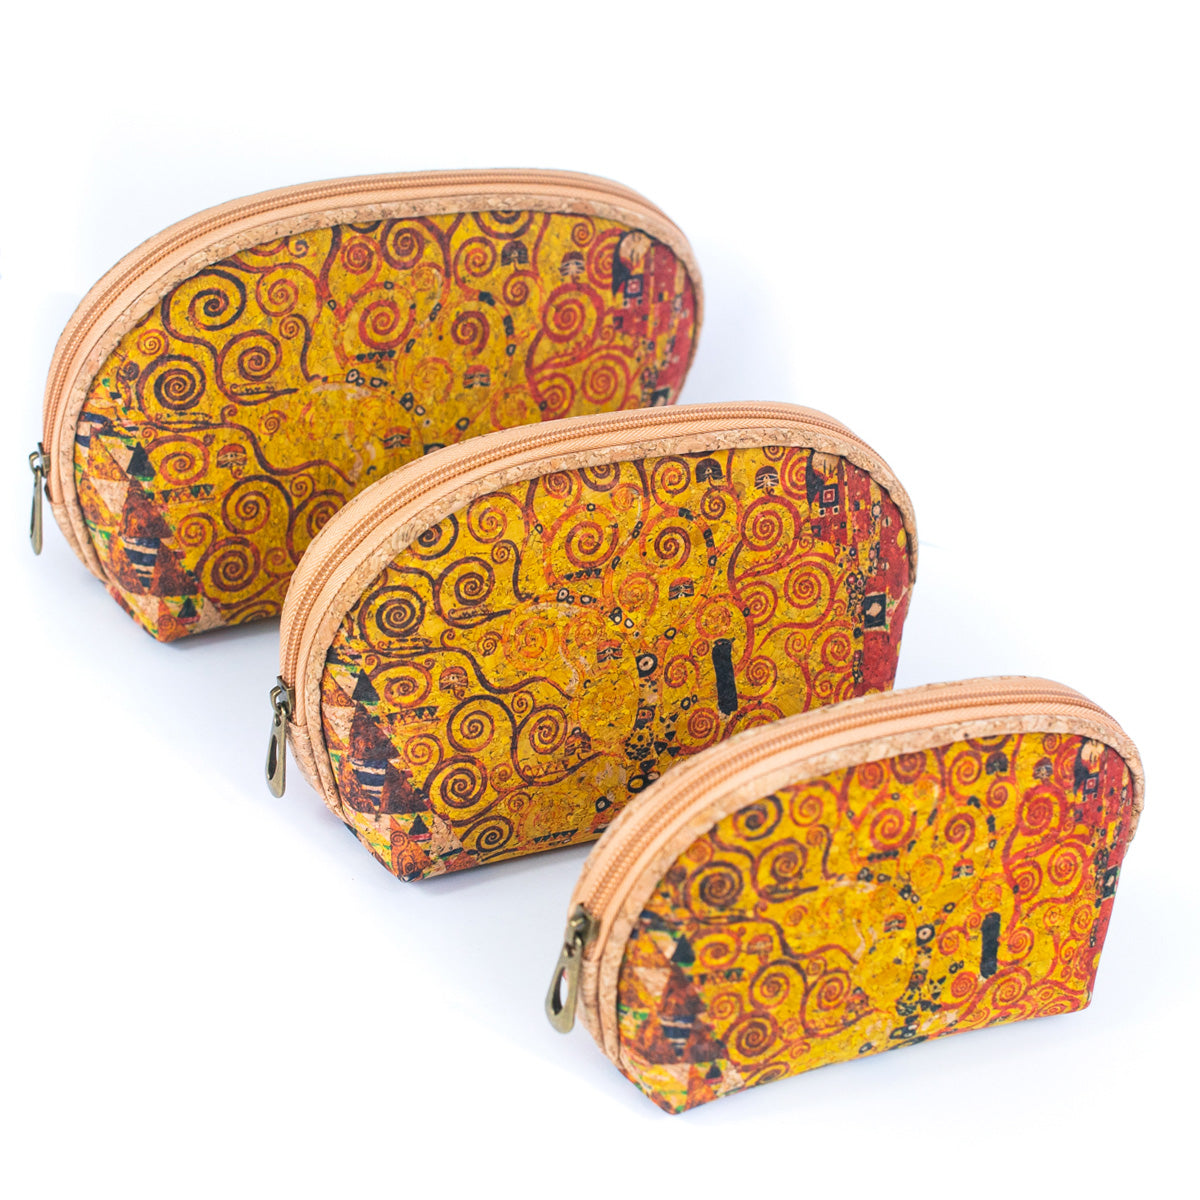 Luxury Women's 3-Piece Cork Cosmetic Bag Set | THE CORK COLLECTION